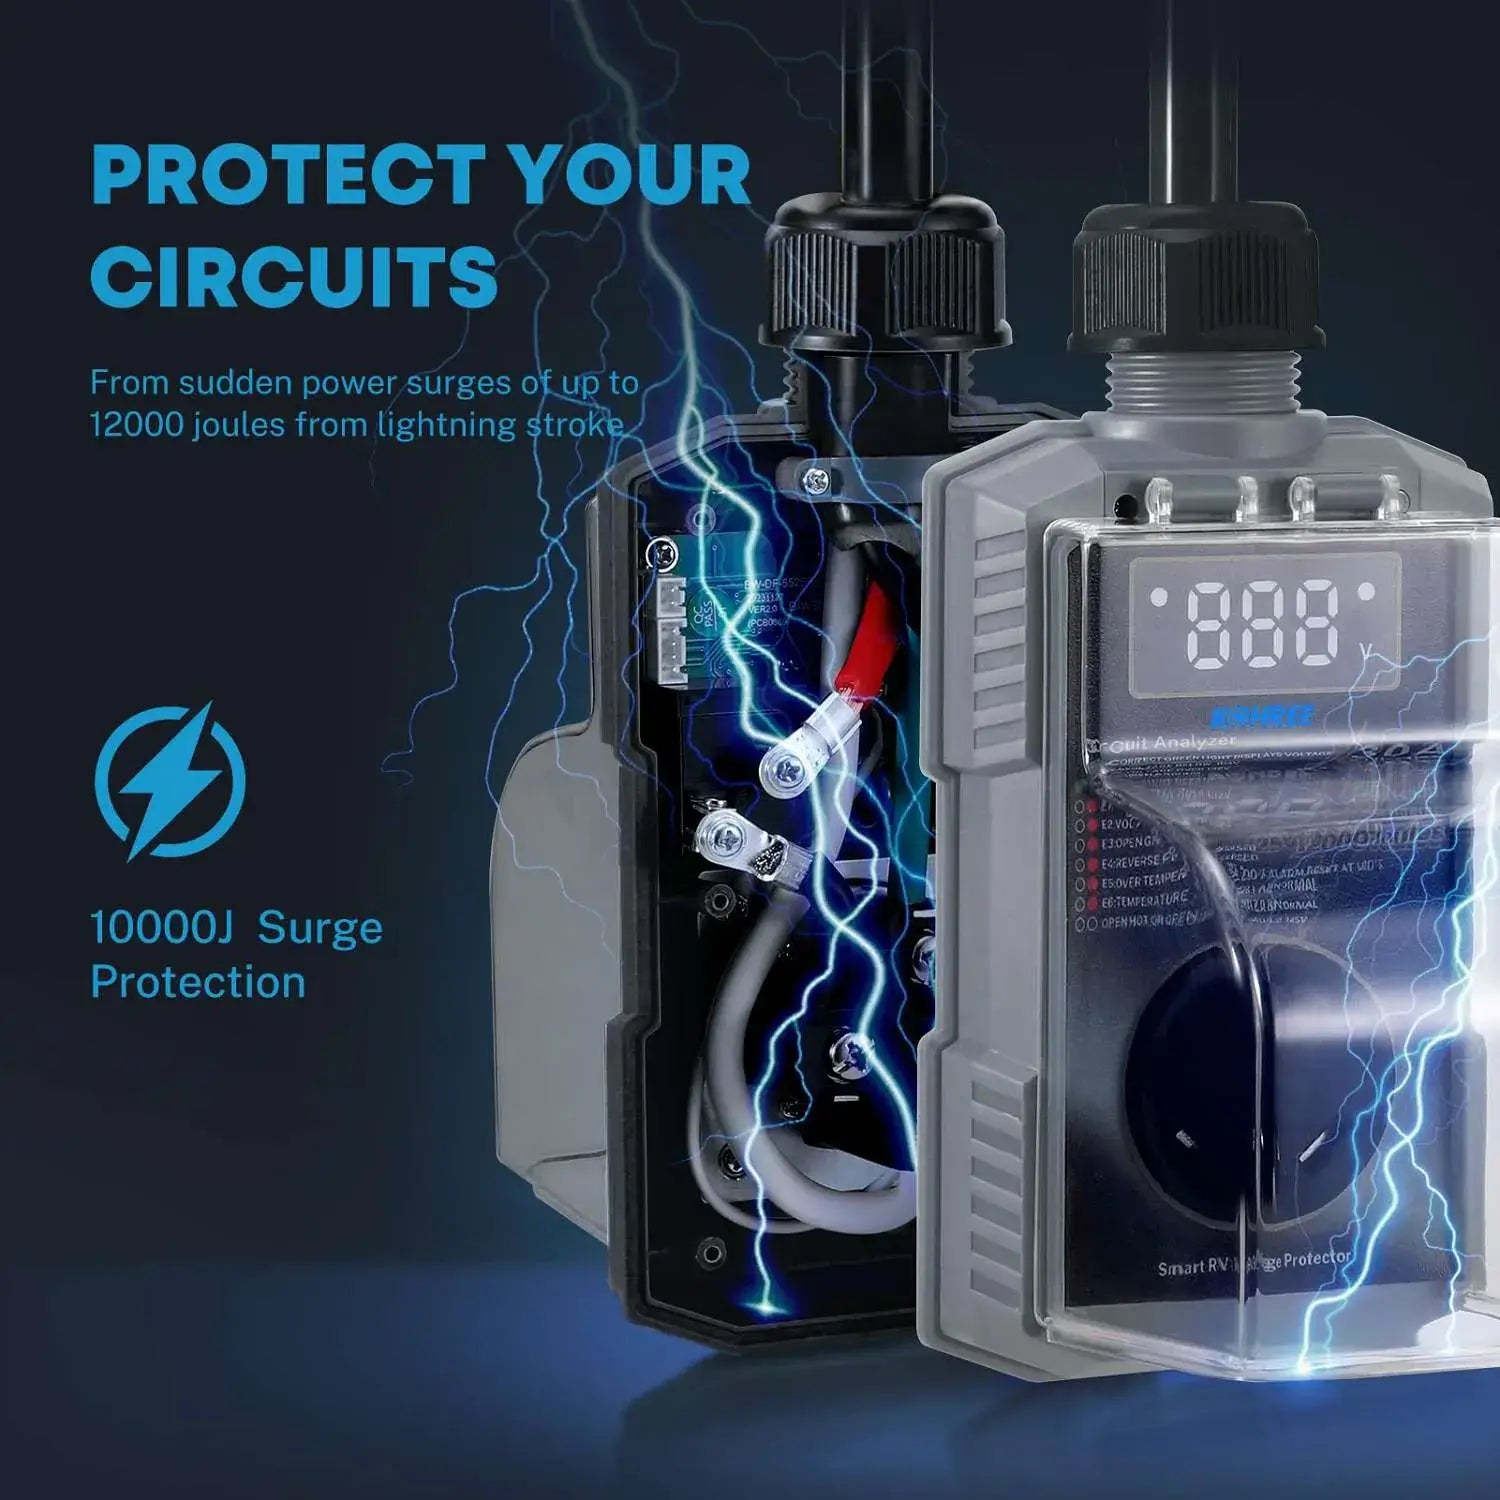 10000 joules surge protection for rvs